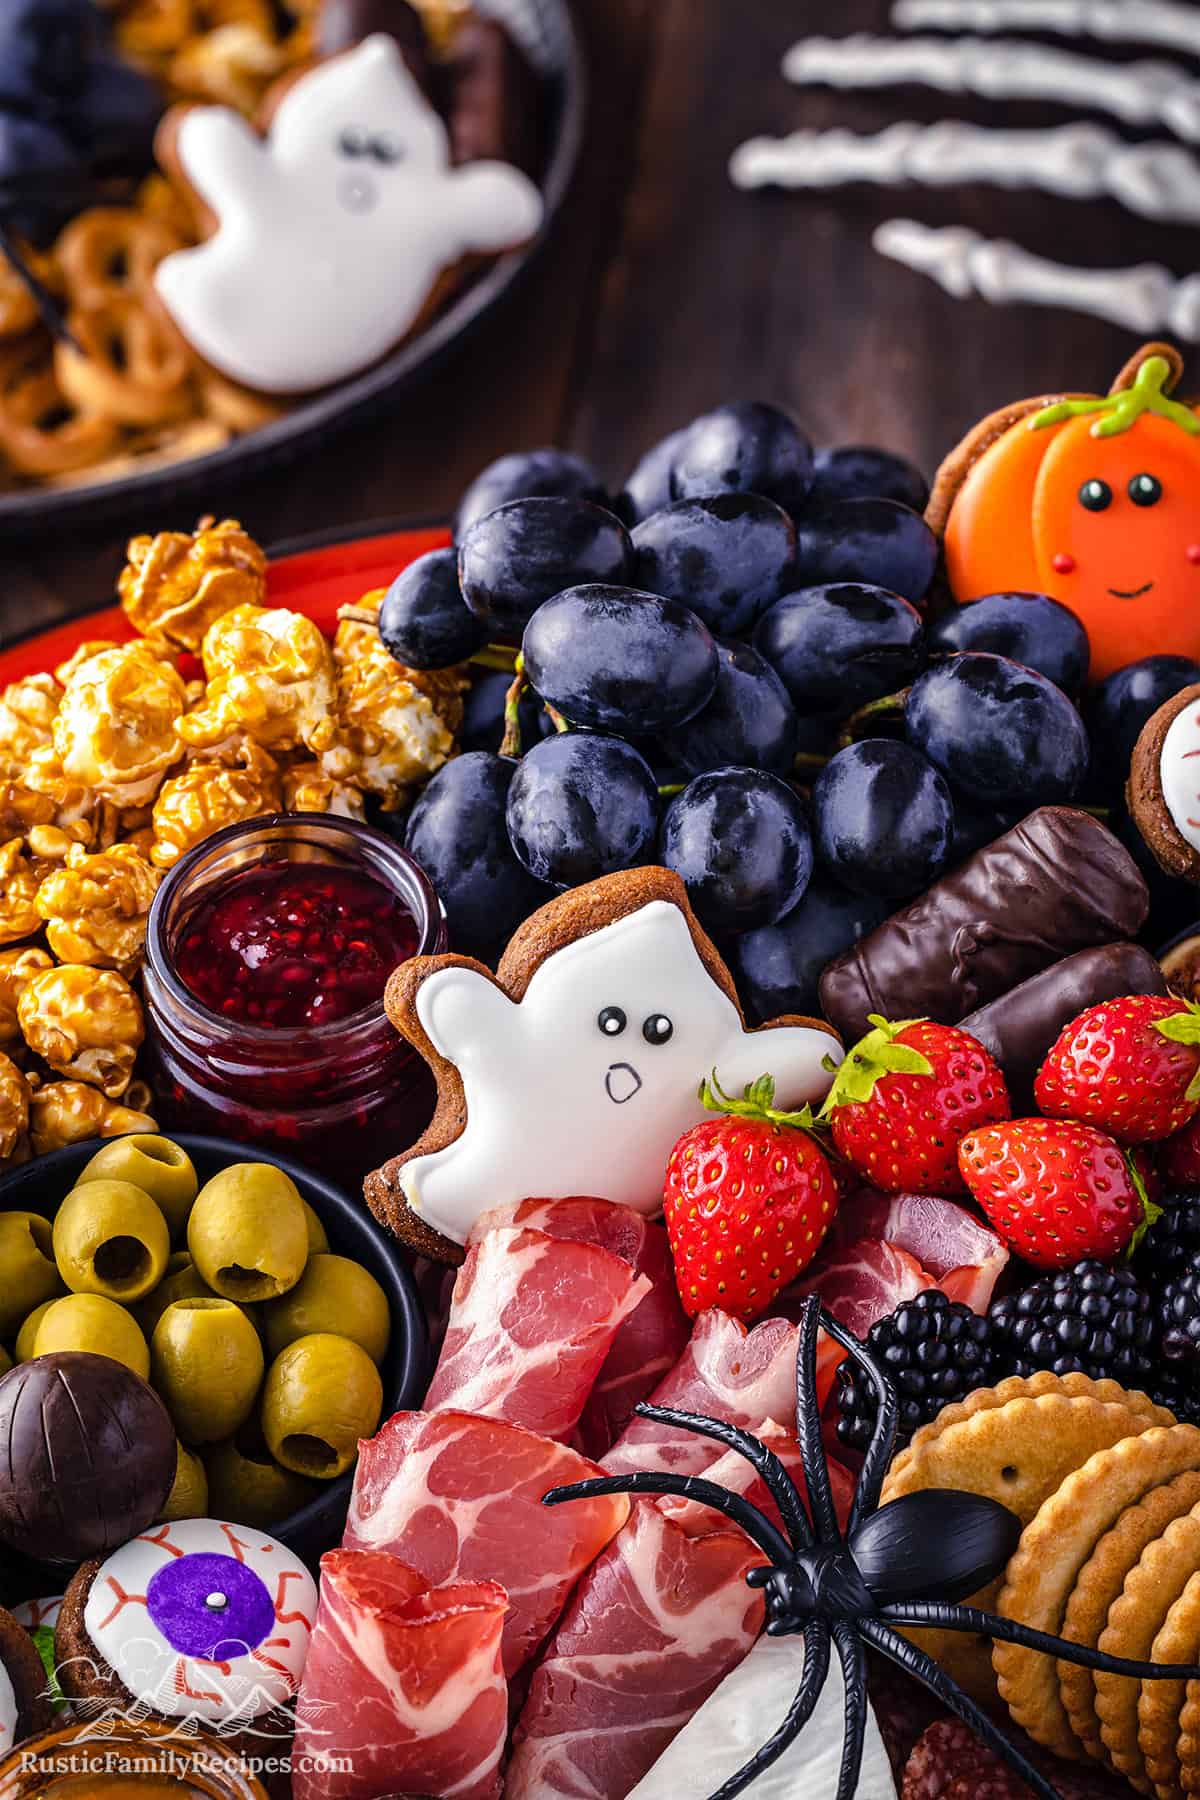 A halloween themed charcuterie board with a skeleton hand and ghost cookies